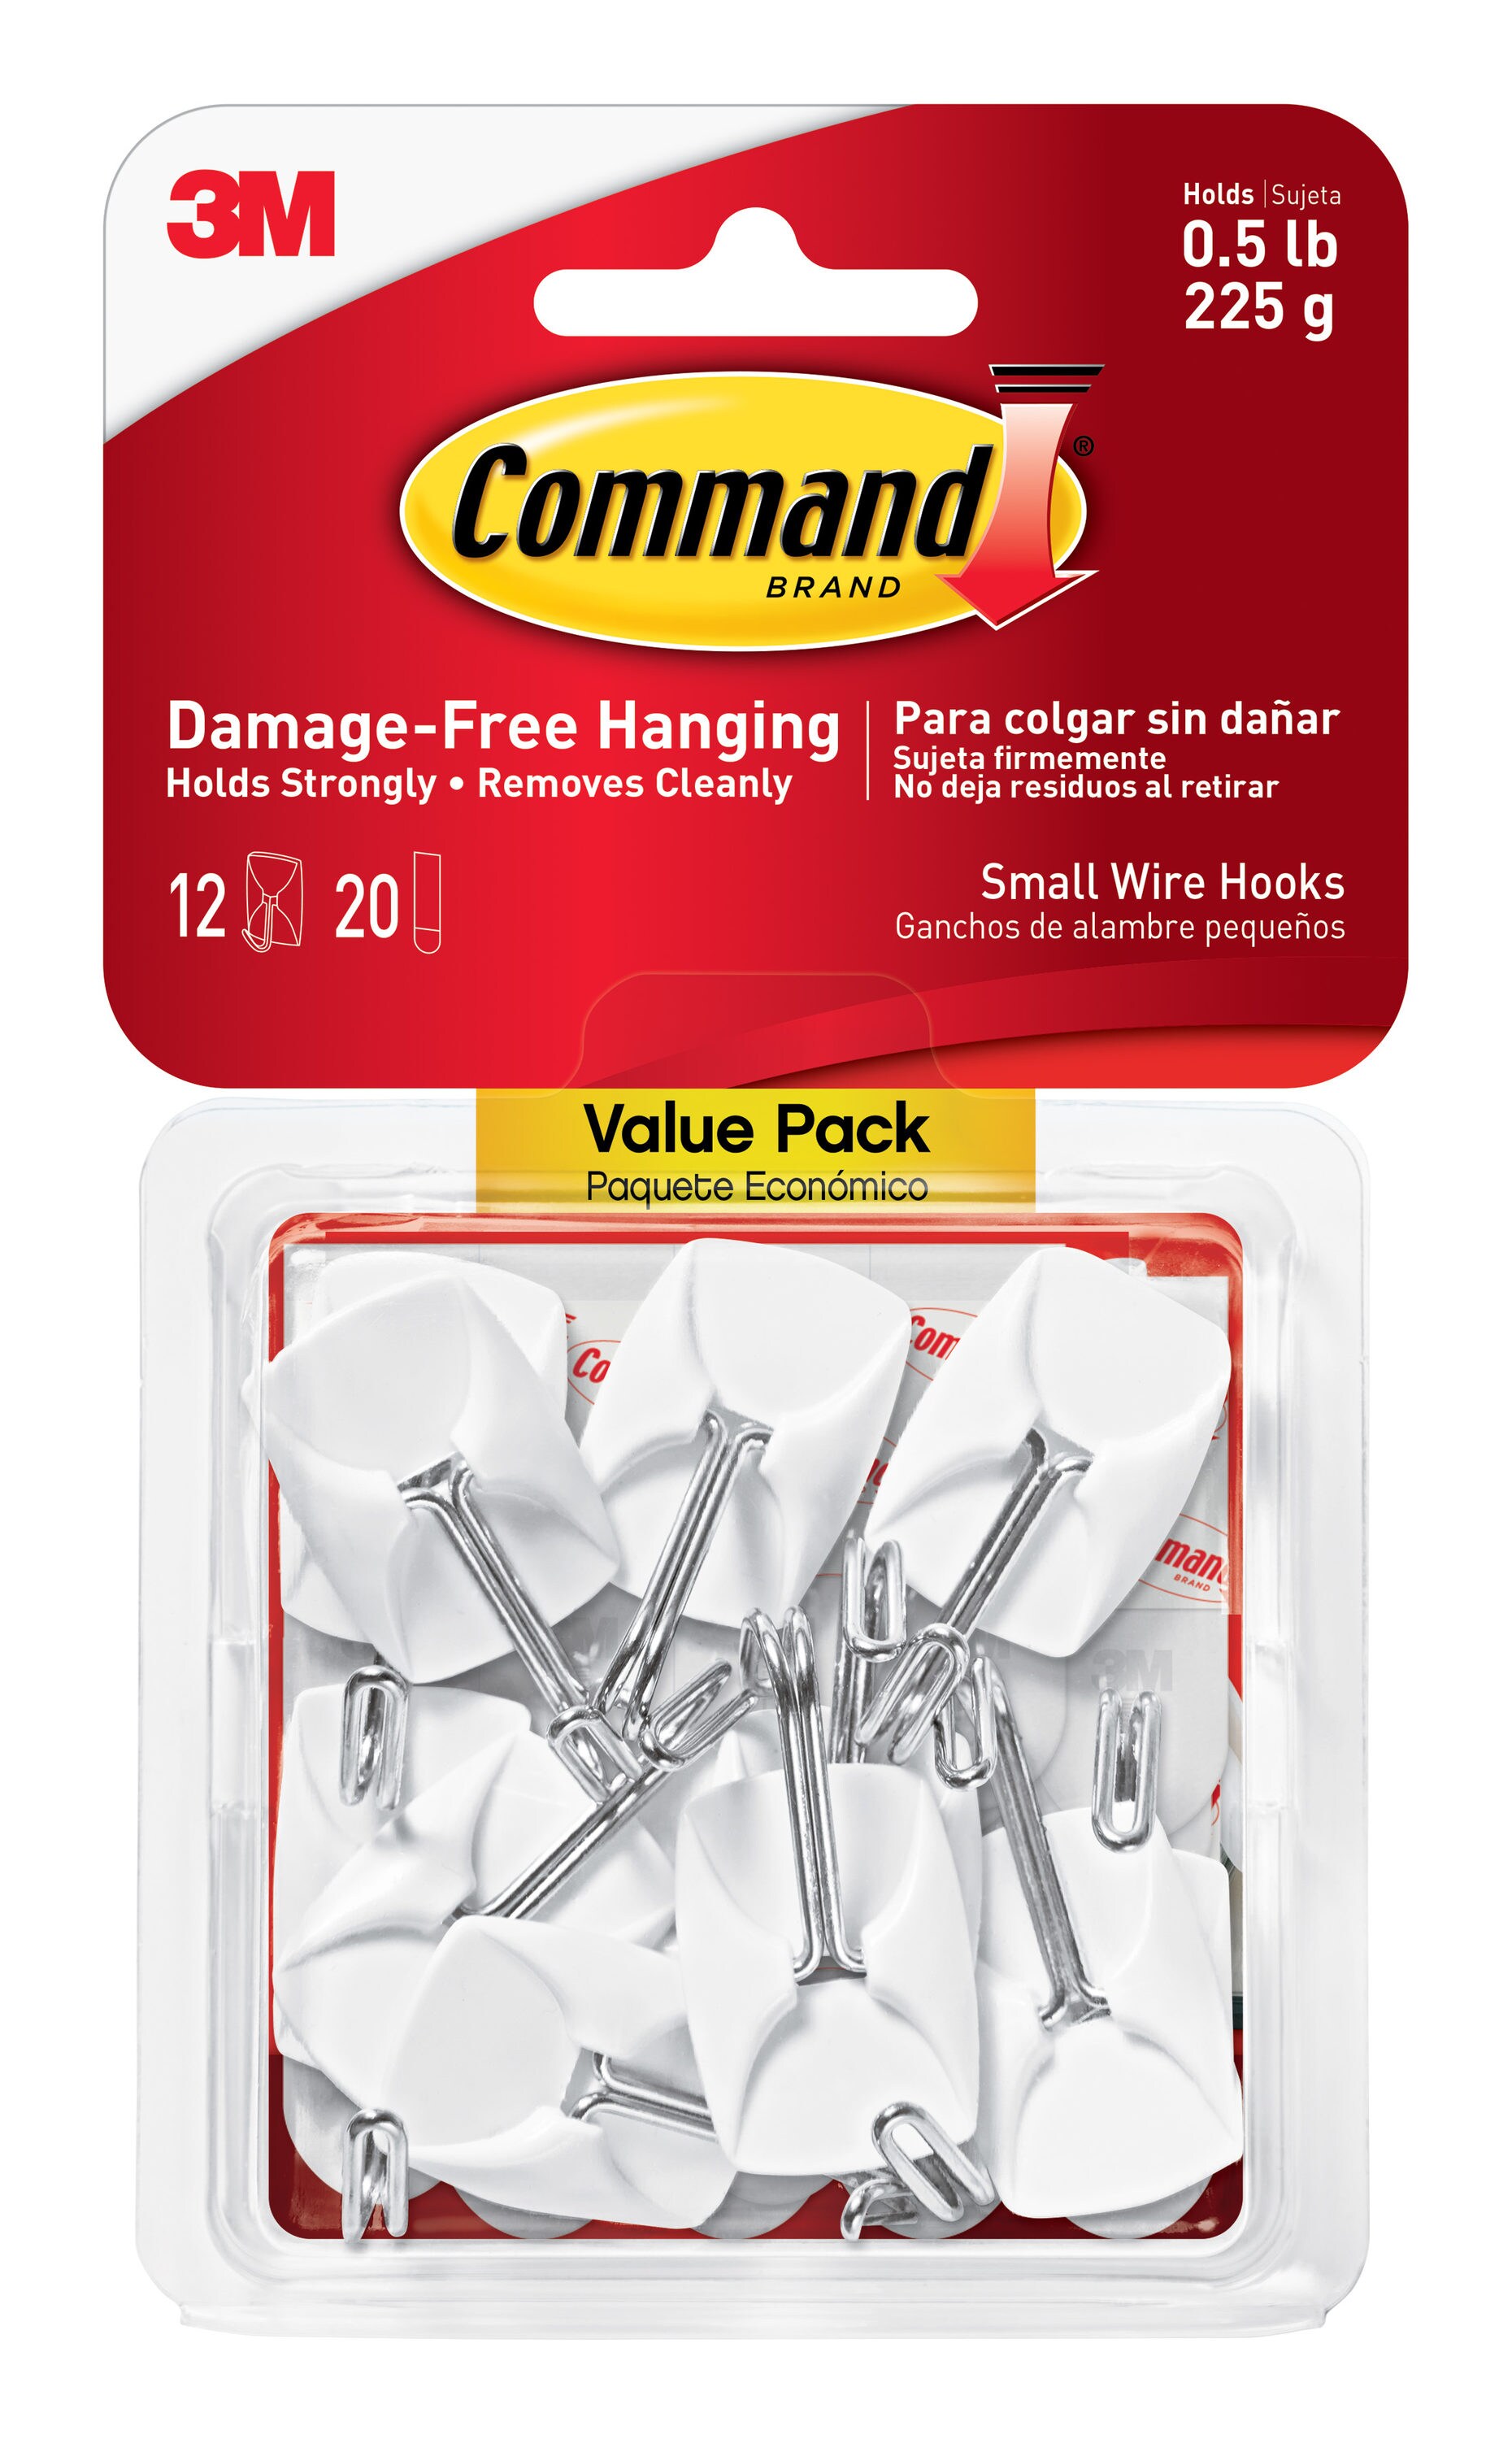 3M COMMAND CORD ORGANIZER CLIPS CABLE TIES DECORATIVE CLEAR WHITE REMOVABLE TAPE 